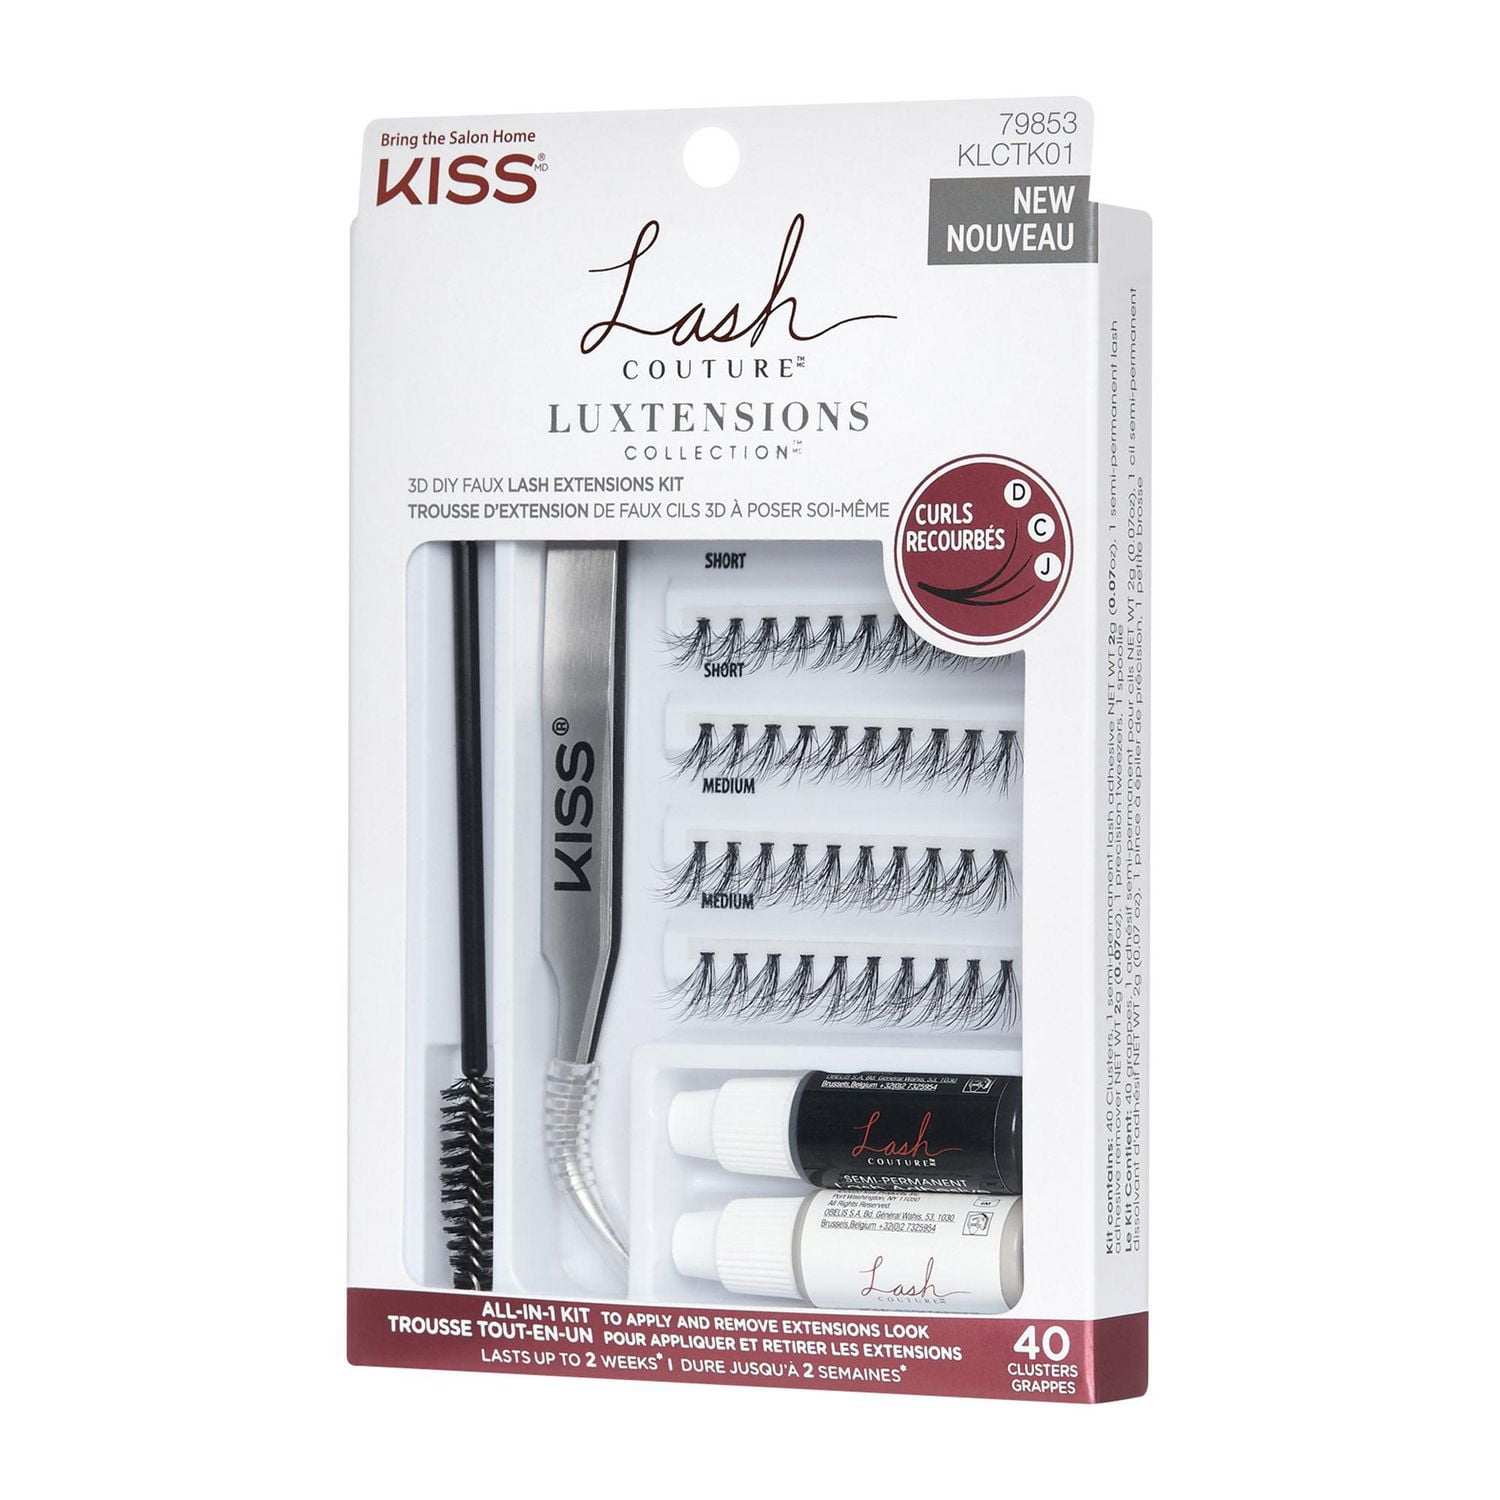 KISS Lash Couture Luxtension Collection - Kit - 40 Clusters, All